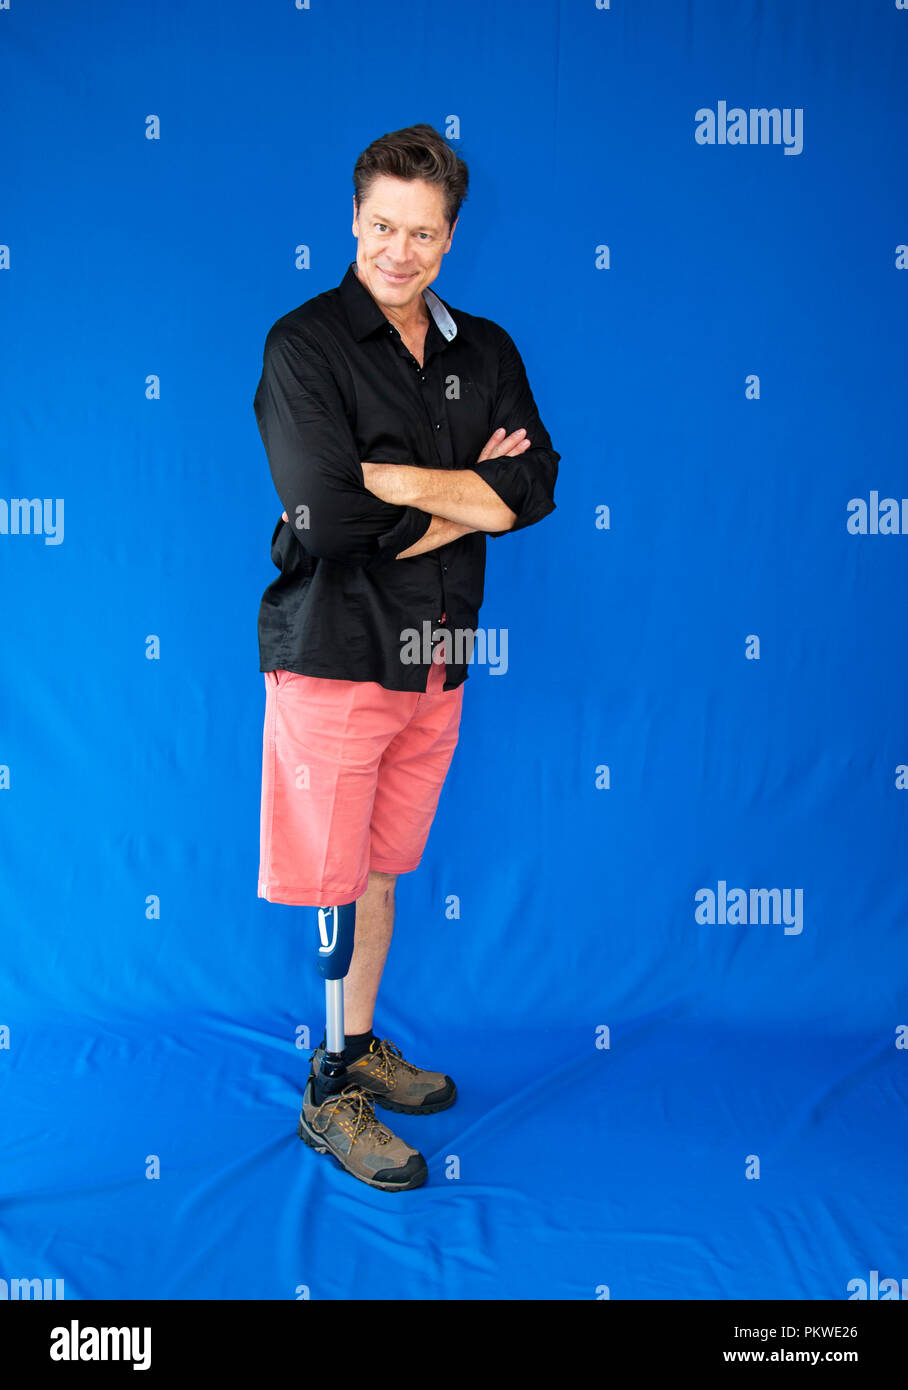 Middle-aged man with physical, leaning on his prosthesis. Stock Photo